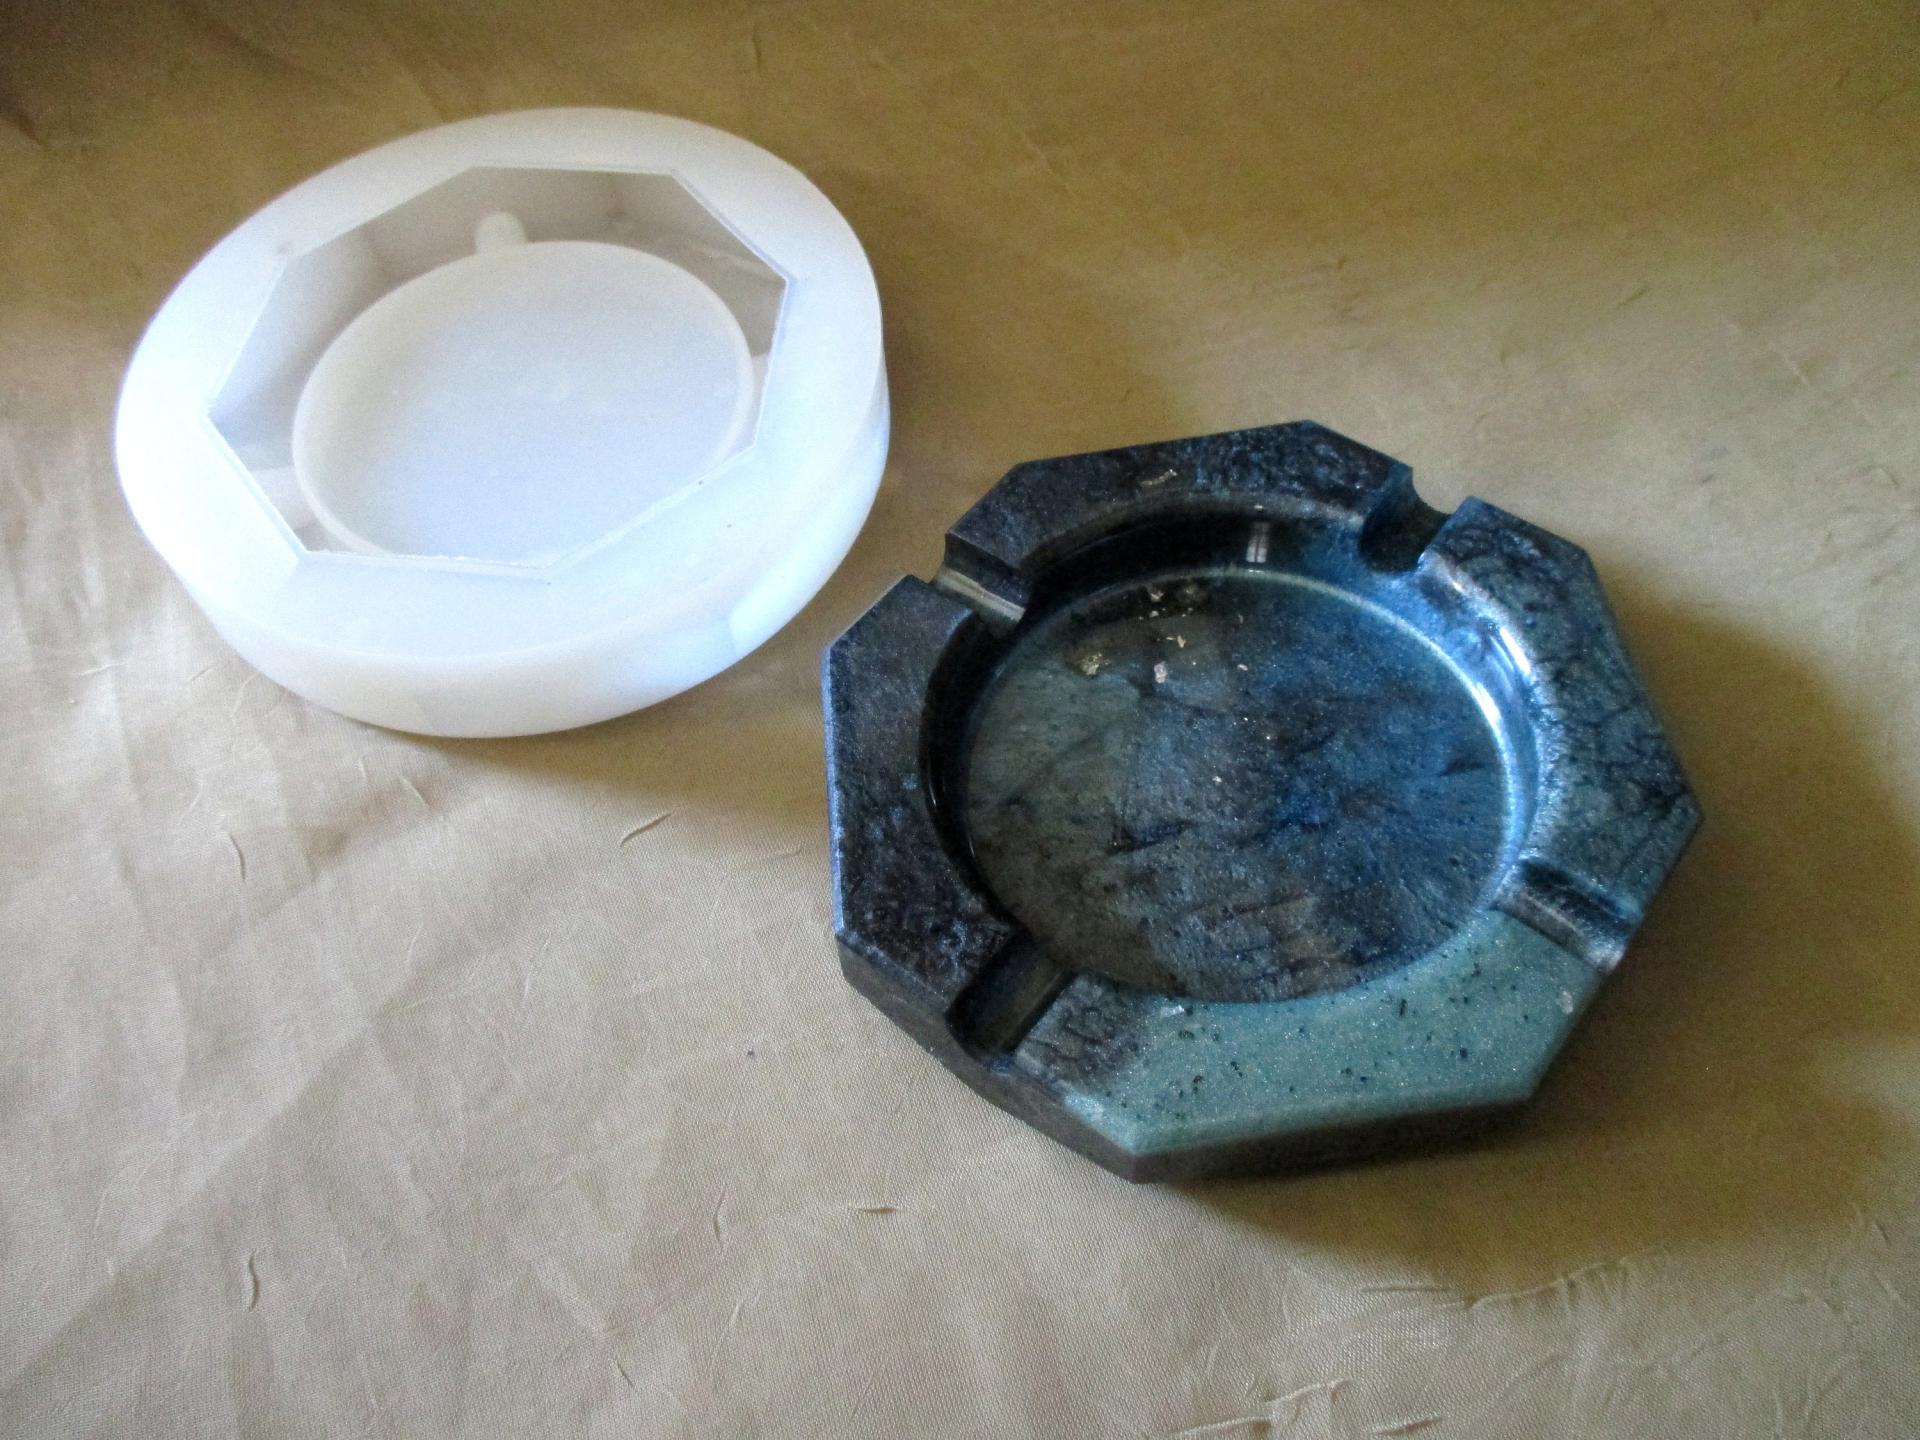 Ashtray Casting Mold - for Epoxy Resin, Clay or other Casting Mediums